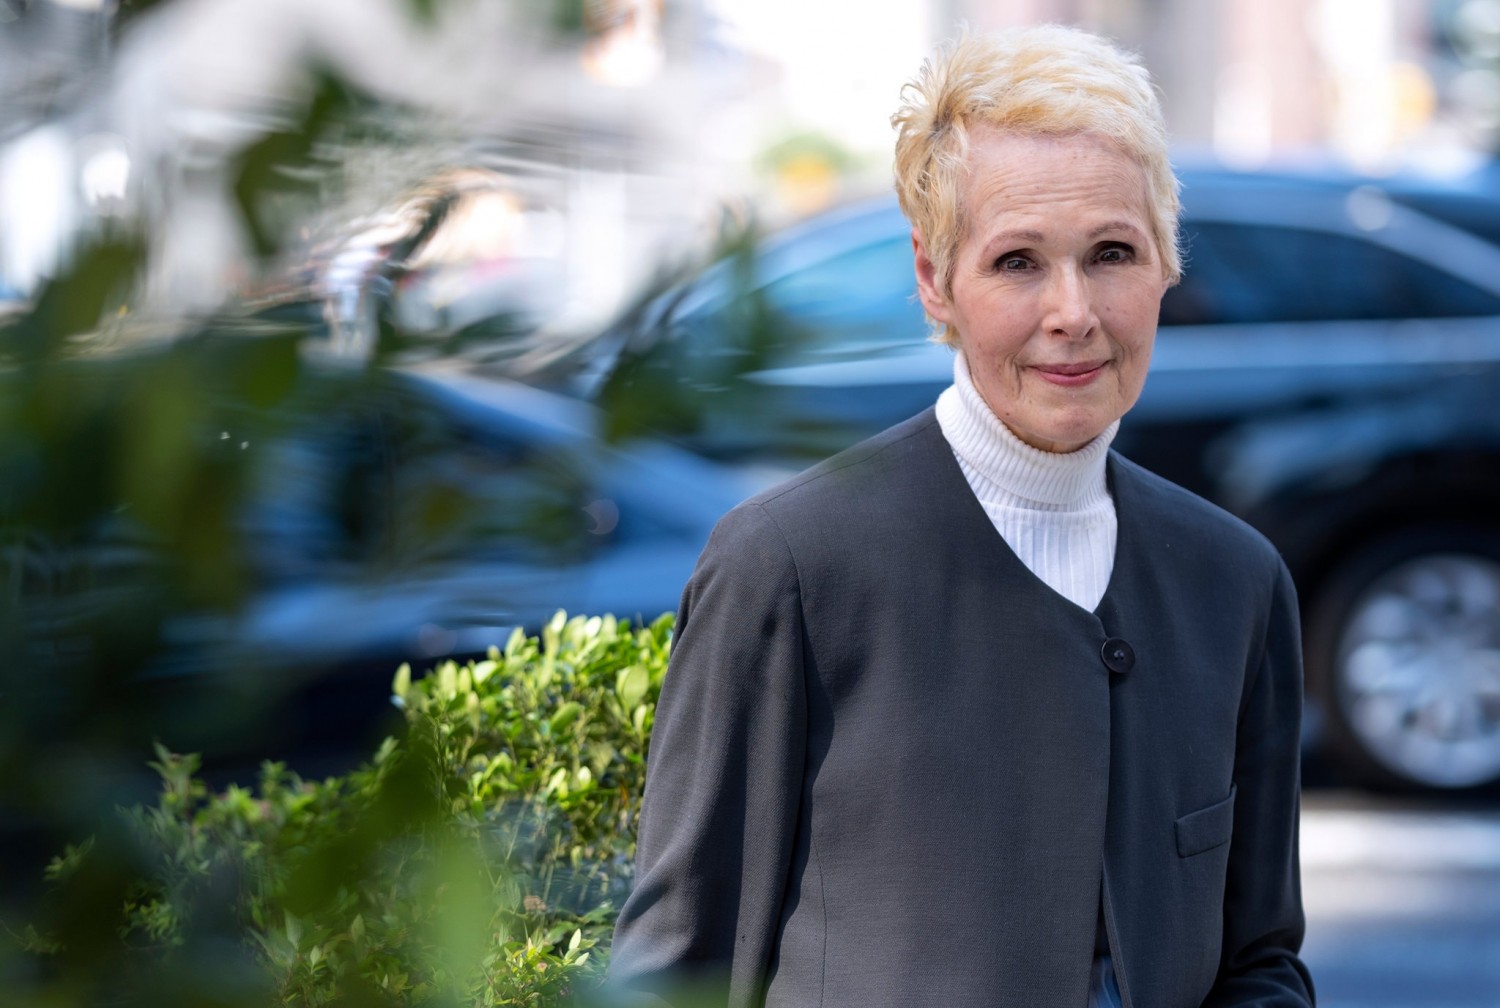 E. Jean Carroll on Sunday in New York. She says Donald J. Trump sexually assaulted her in a dressing room at a Manhattan department store in the mid-1990s. He denies the accusation.CreditCreditCraig Ruttle/Associated Press